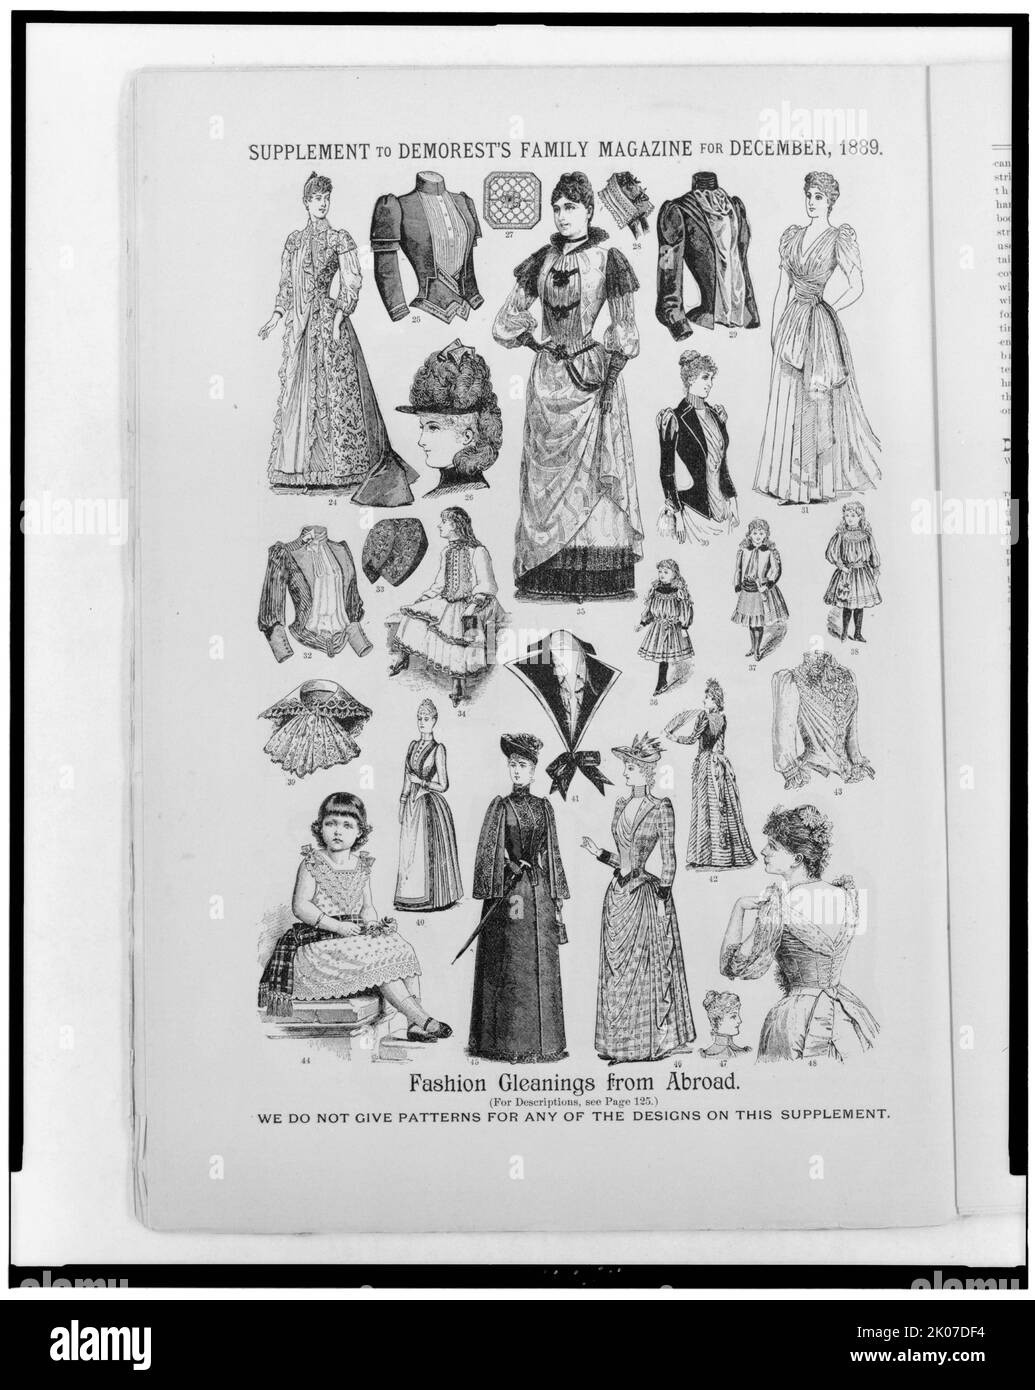 Fashion gleanings from abroad, 1889. Dresses, hats, jackets, and other fashions for women and children. Illus in: Demorest's family magazine, December, 1889, p. 124. Stock Photo